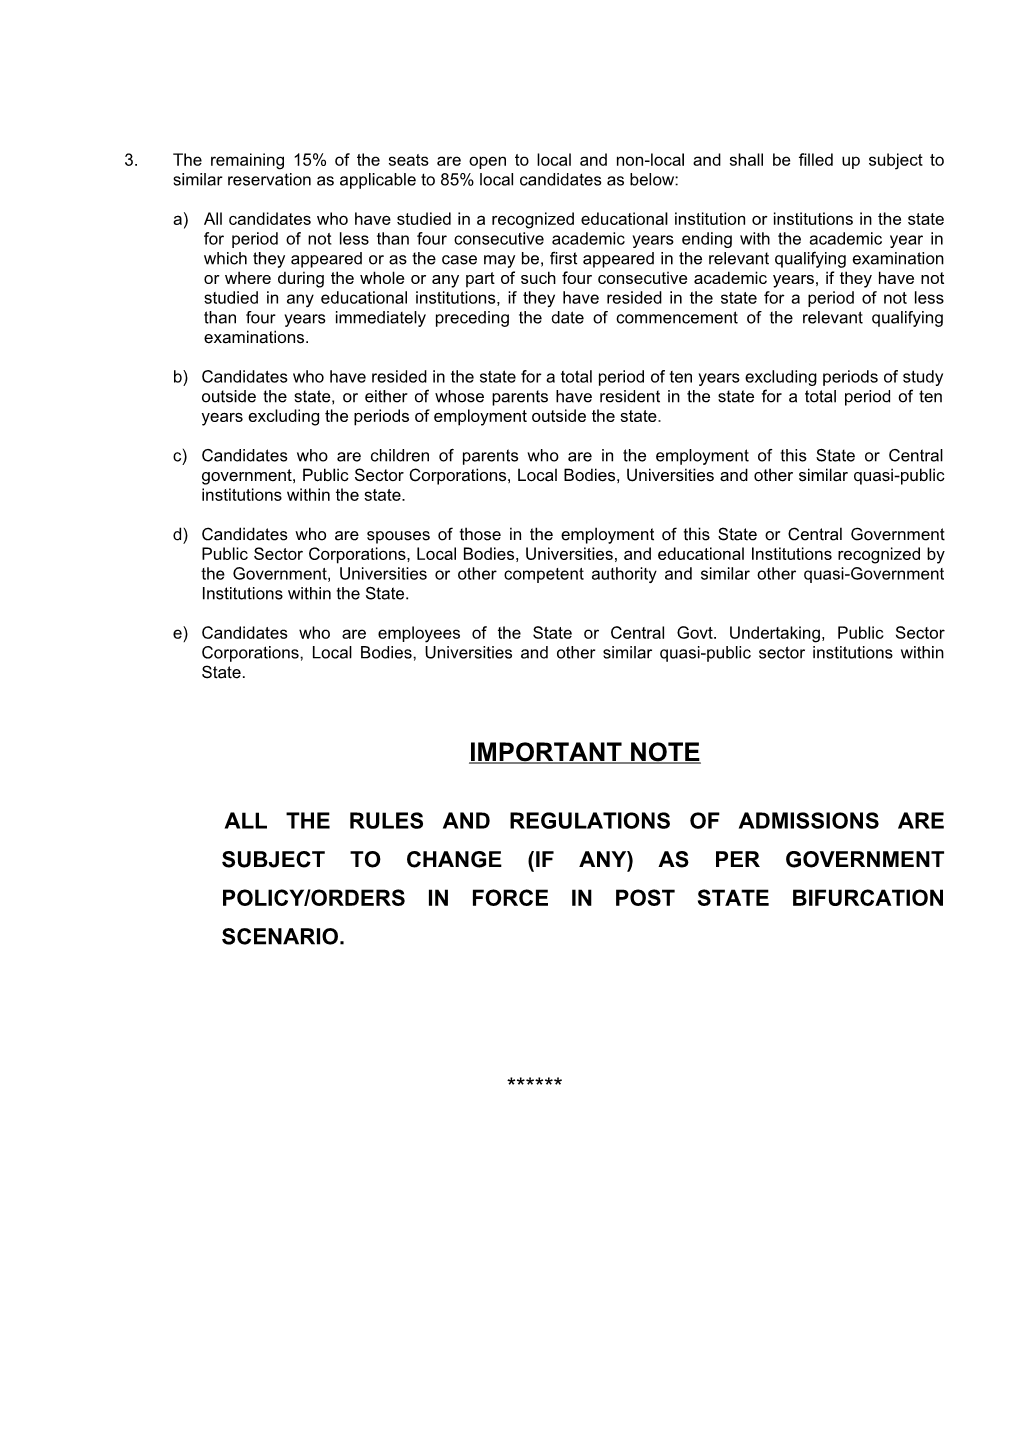 Rules of Admission in Accordance with the Andhra Pradesh